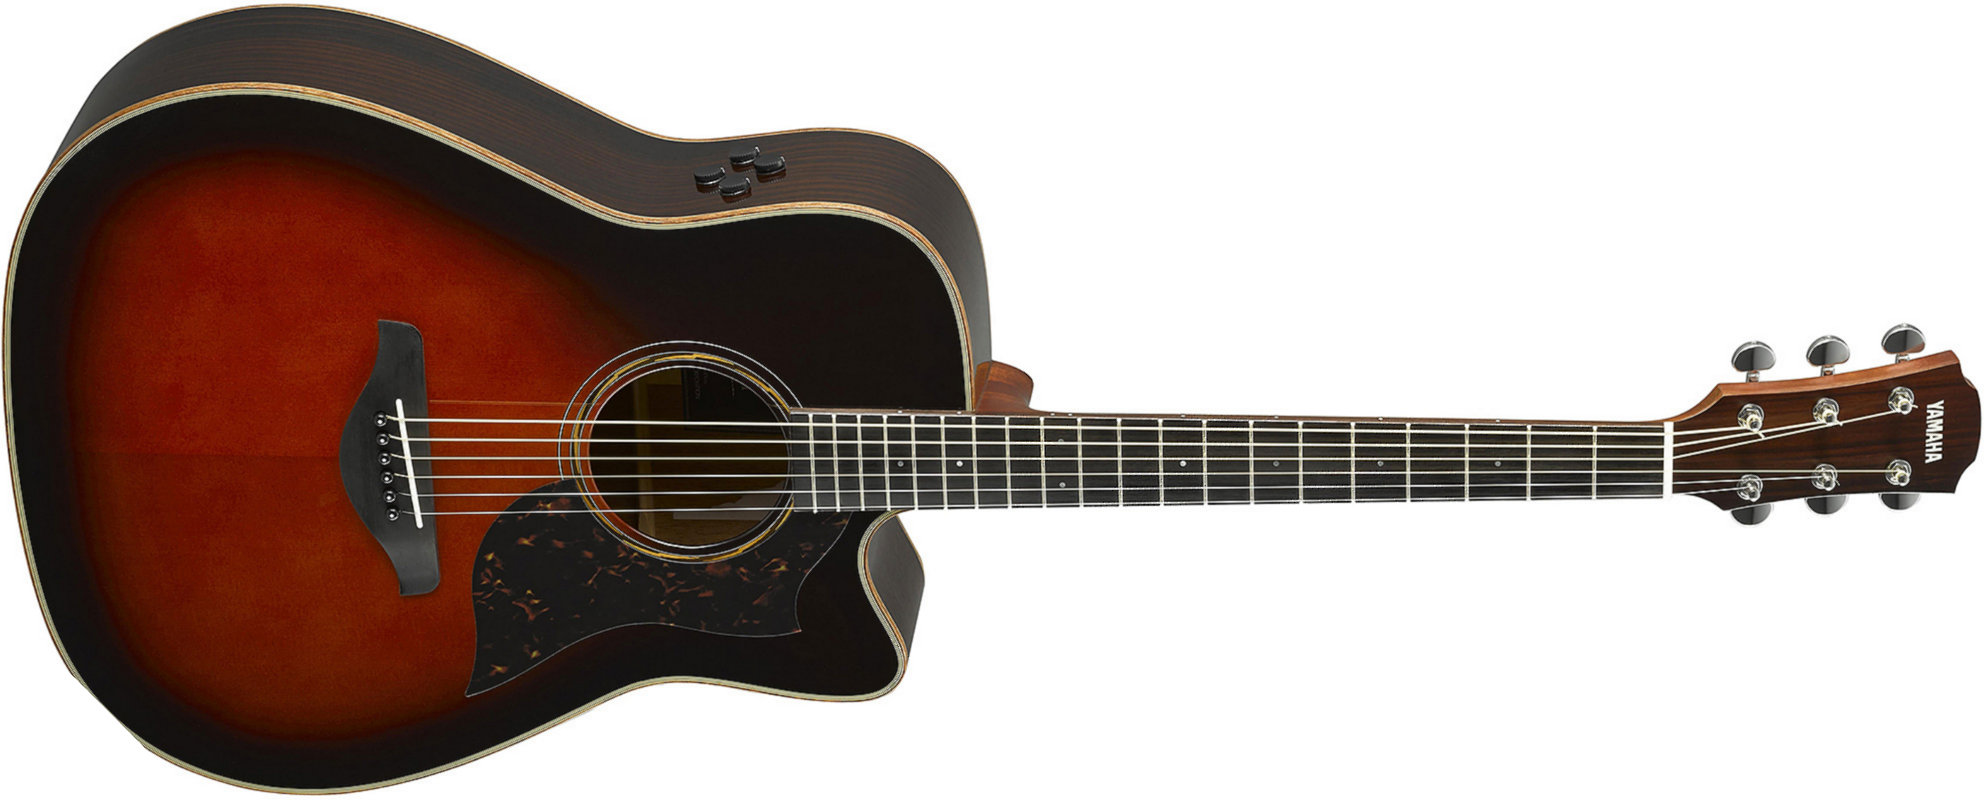 Yamaha A3r Are Tbs Dreadnought Cw Epicea Palissandre 2017 - Tobacco Brown Sunburst - Electro acoustic guitar - Main picture